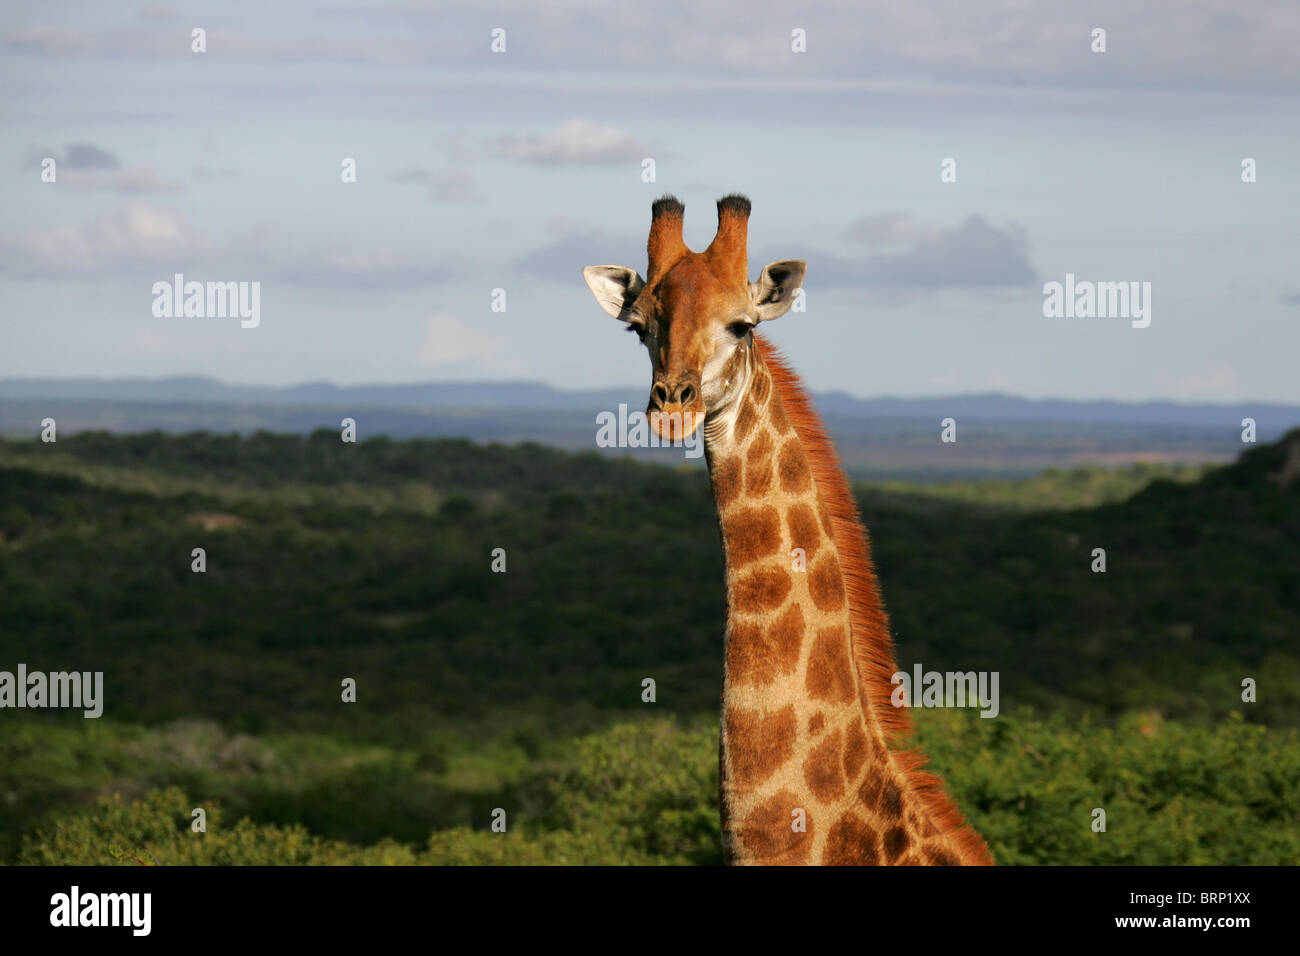 Giraffe portrait with a landscape in the background Stock Photo